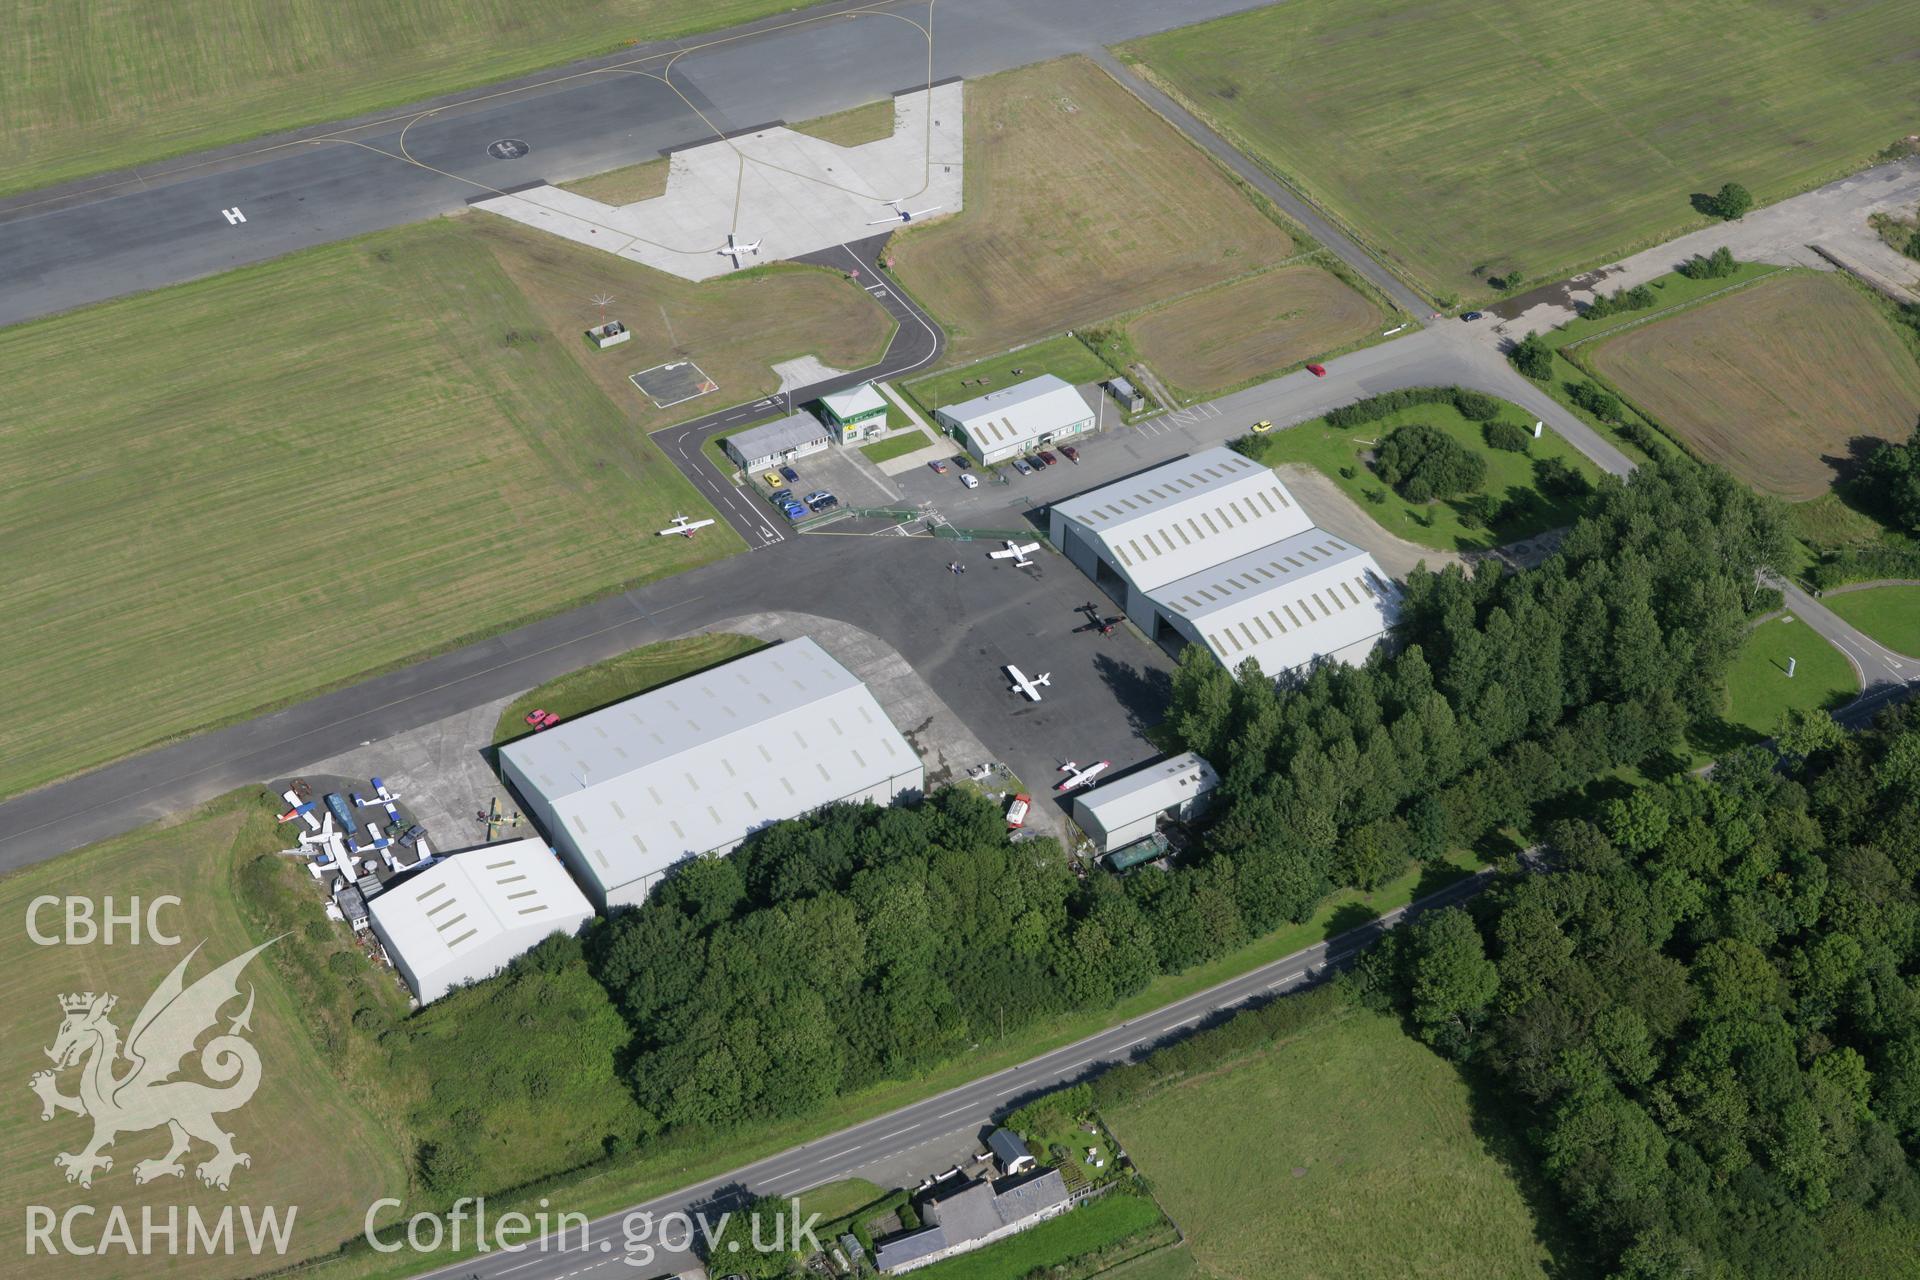 RCAHMW colour oblique photograph of Haverfordwest Airport. Taken by Toby Driver on 01/08/2007.